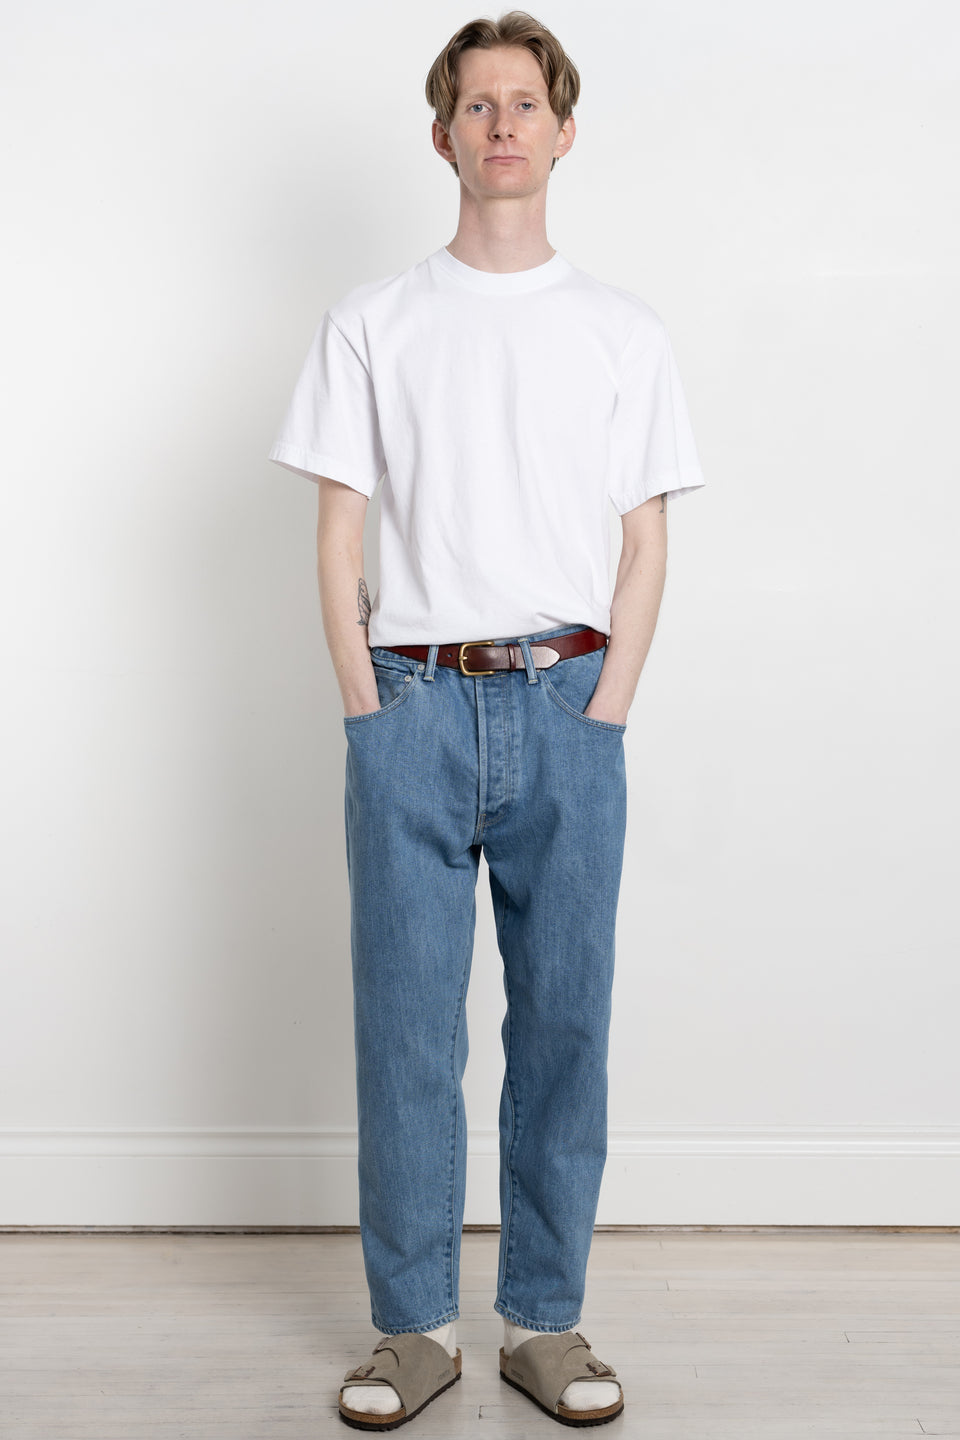 HATSKI Made in Japan 24SS Men's Collection Loose Tapered Selvedge Denim Used / Ice Blue Calculus Victoria BC Canada